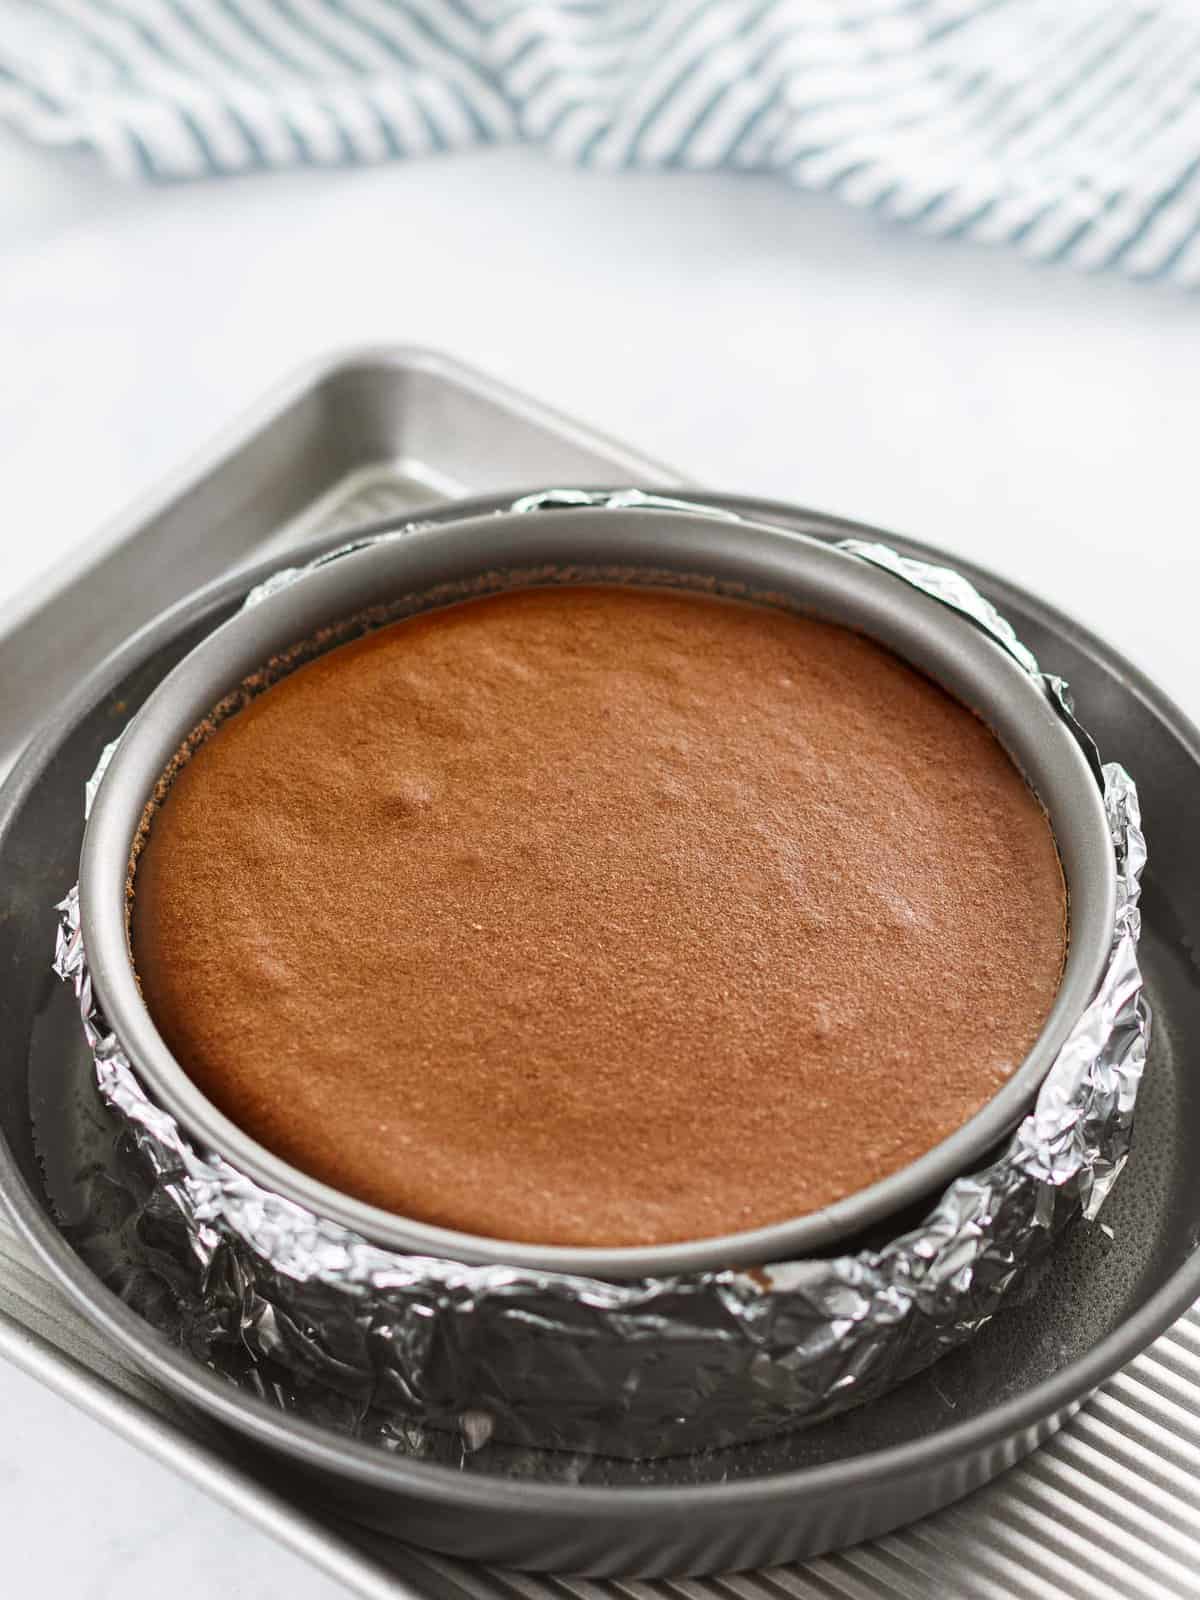 Crack-free chocolate cheesecake in a springform pan and water bath.